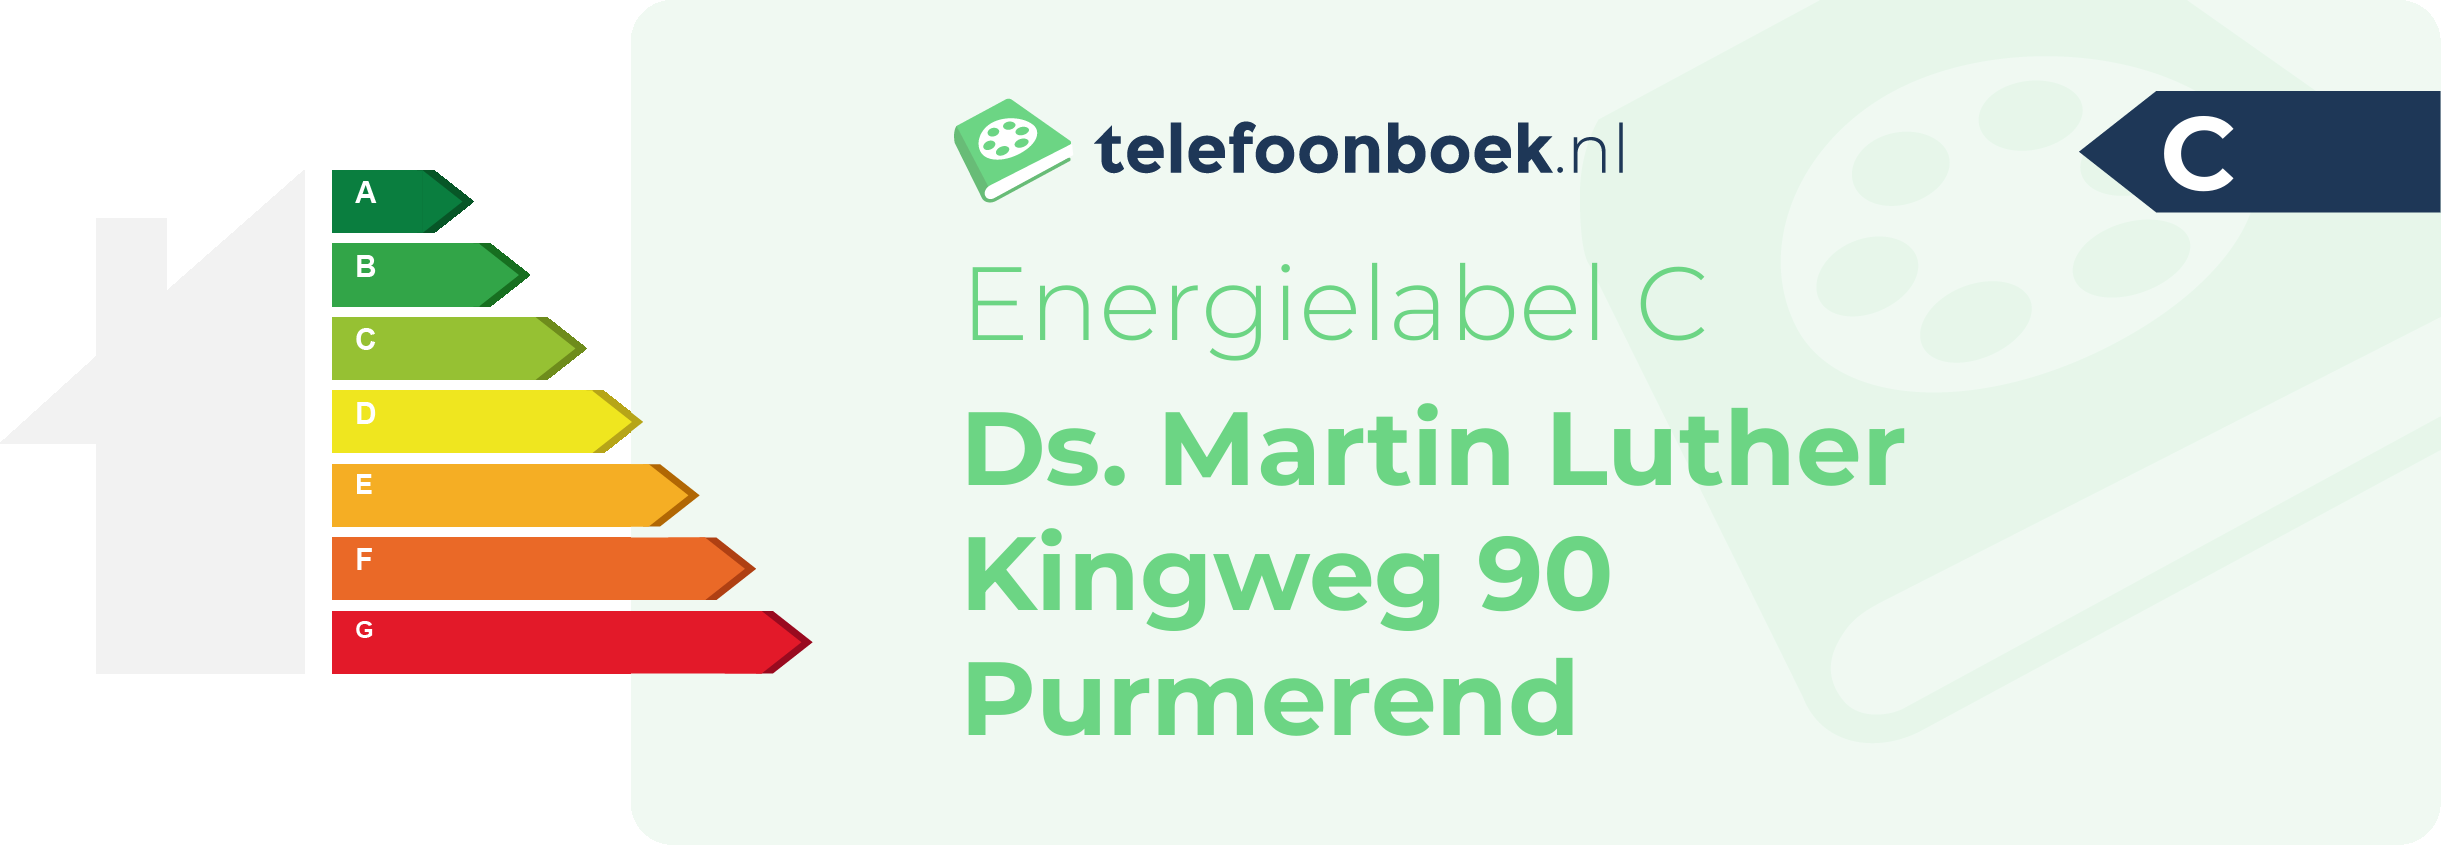 Energielabel Ds. Martin Luther Kingweg 90 Purmerend